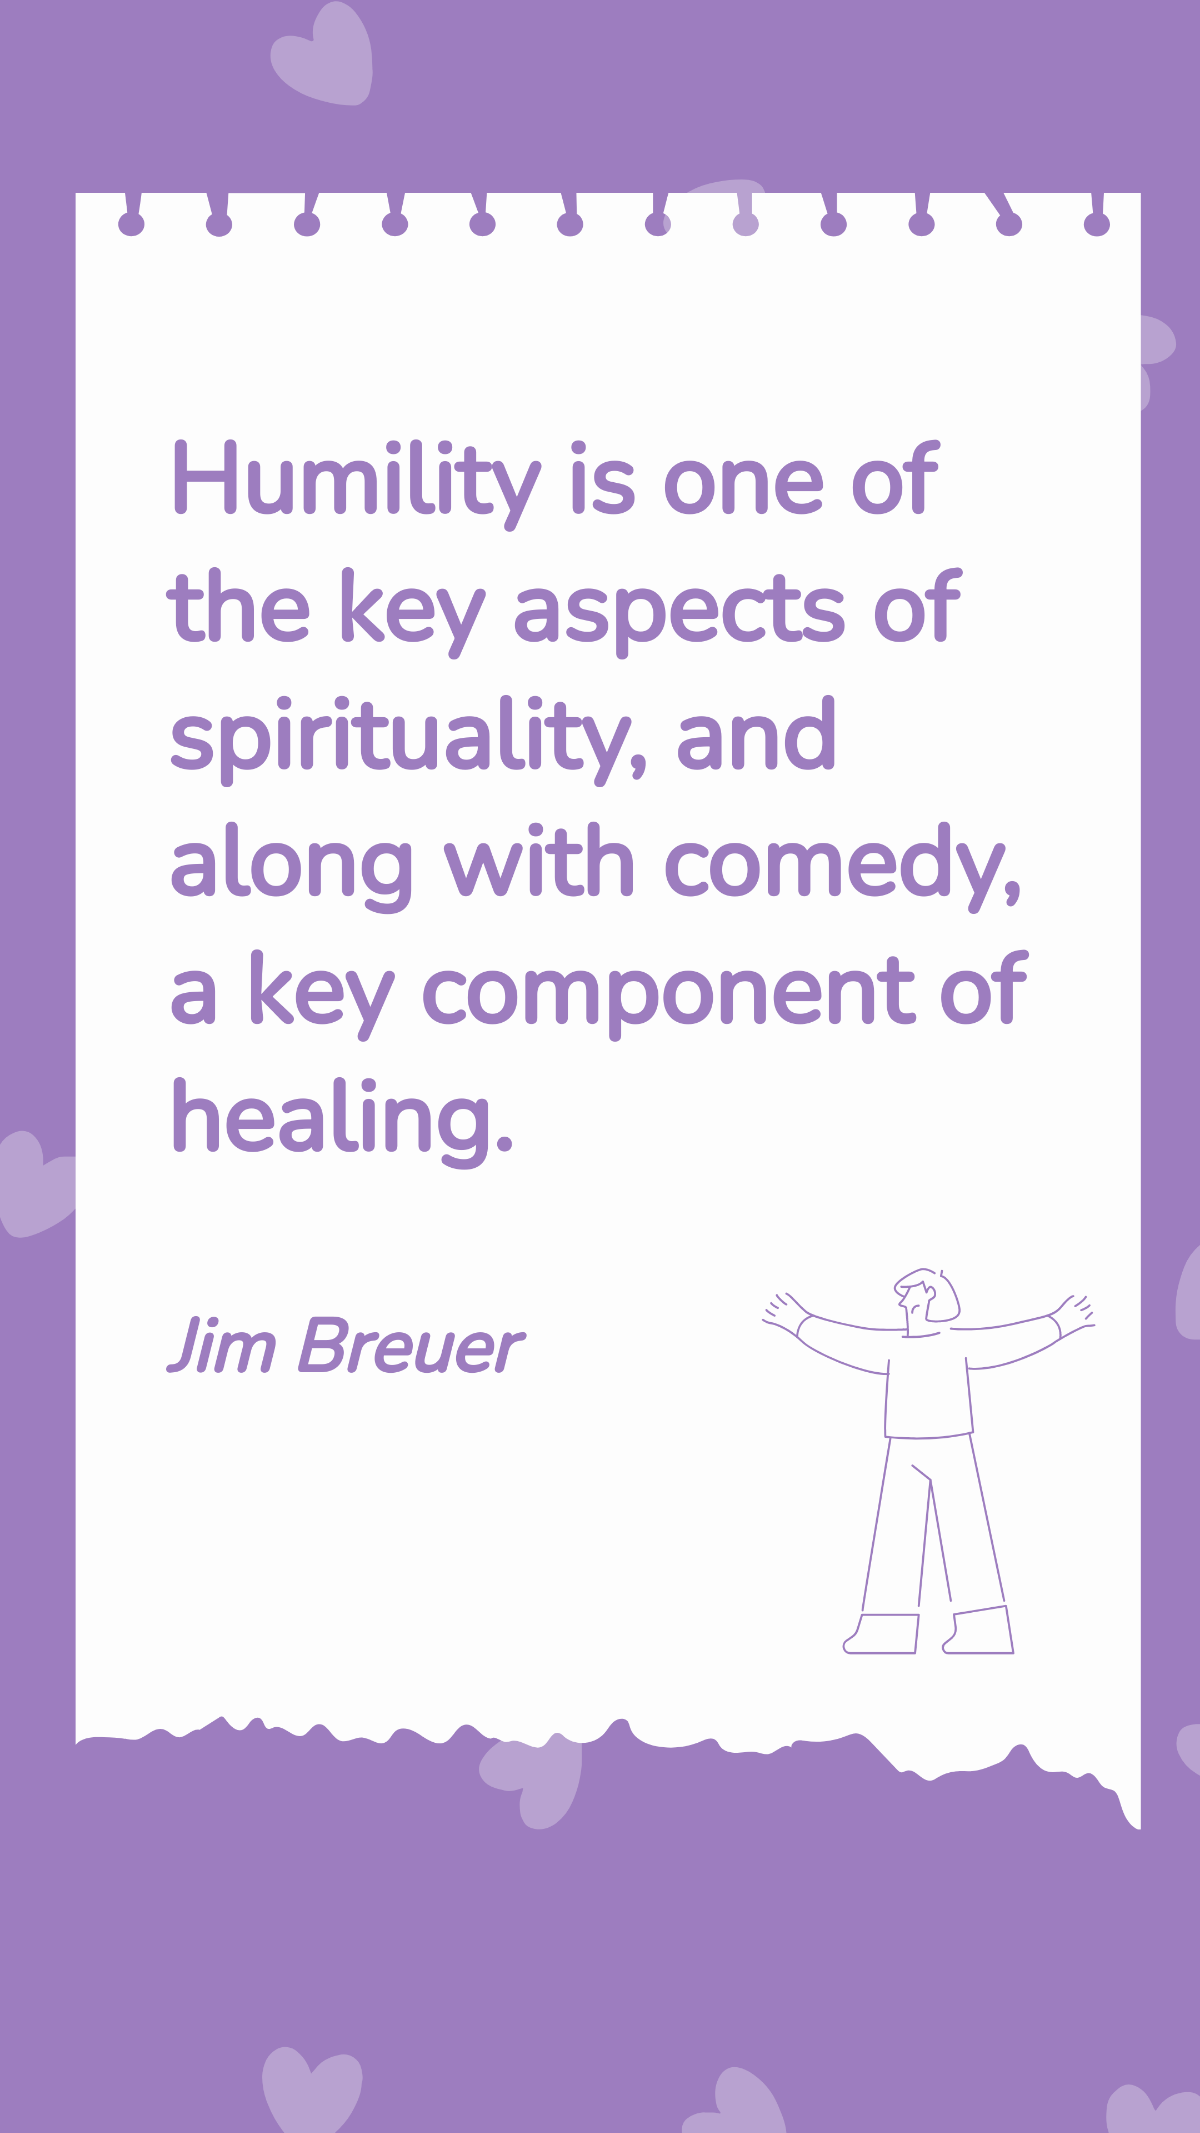 Jim Breuer - Humility is one of the key aspects of spirituality, and along with comedy, a key component of healing.